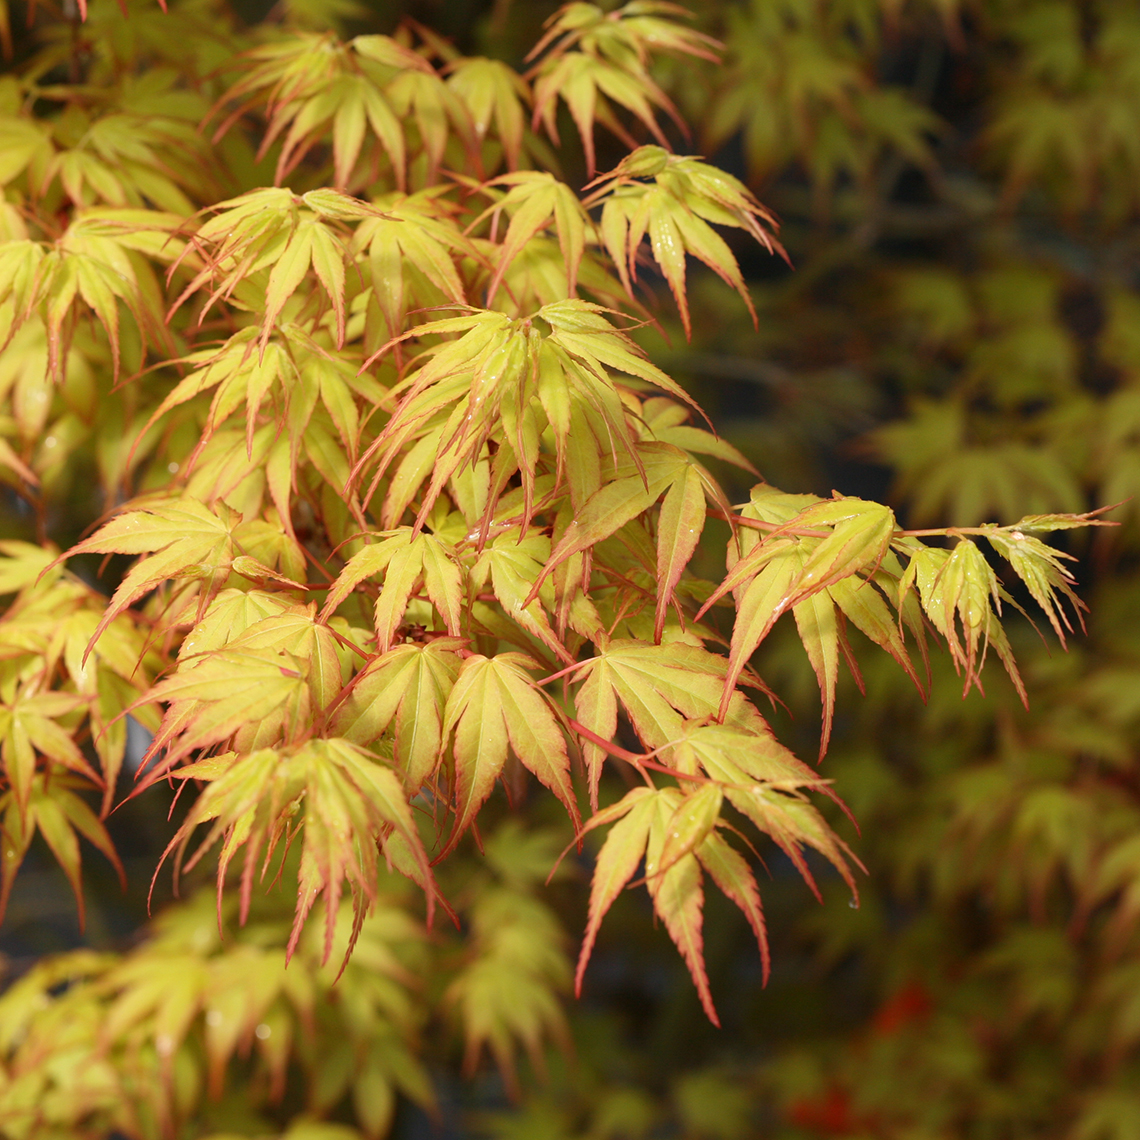 Close up of the bronze foliage tinged in red of Acer palmatum Katsura